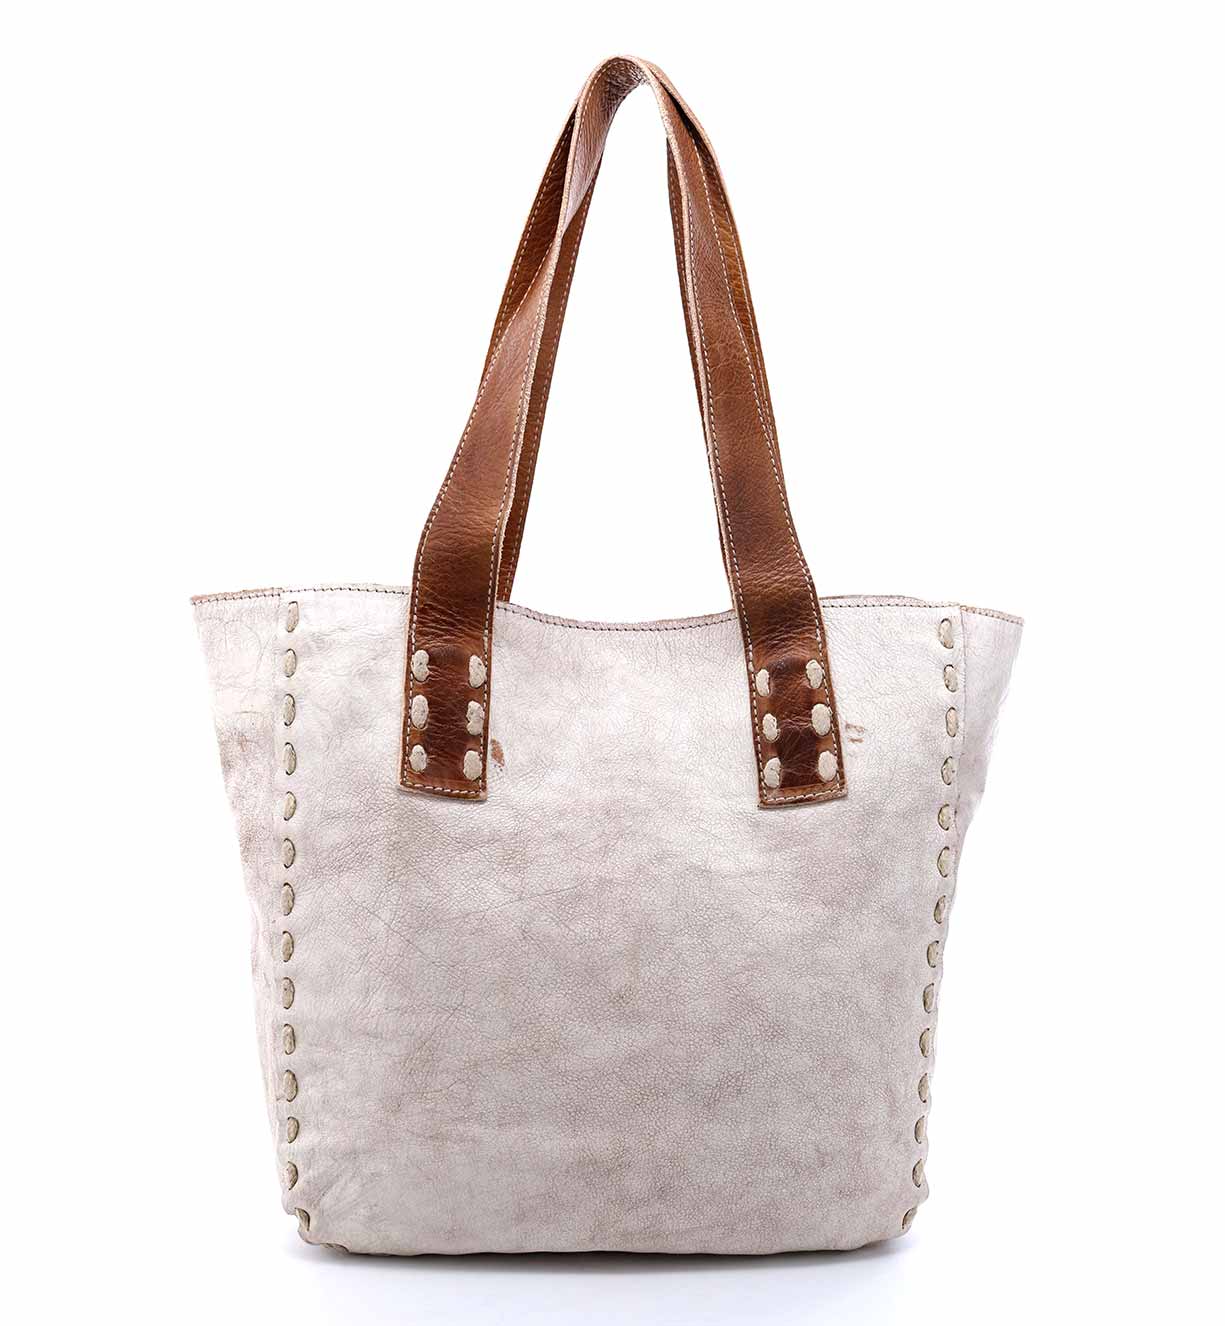 A white Stevie tote bag with brown handles by Bed Stu.